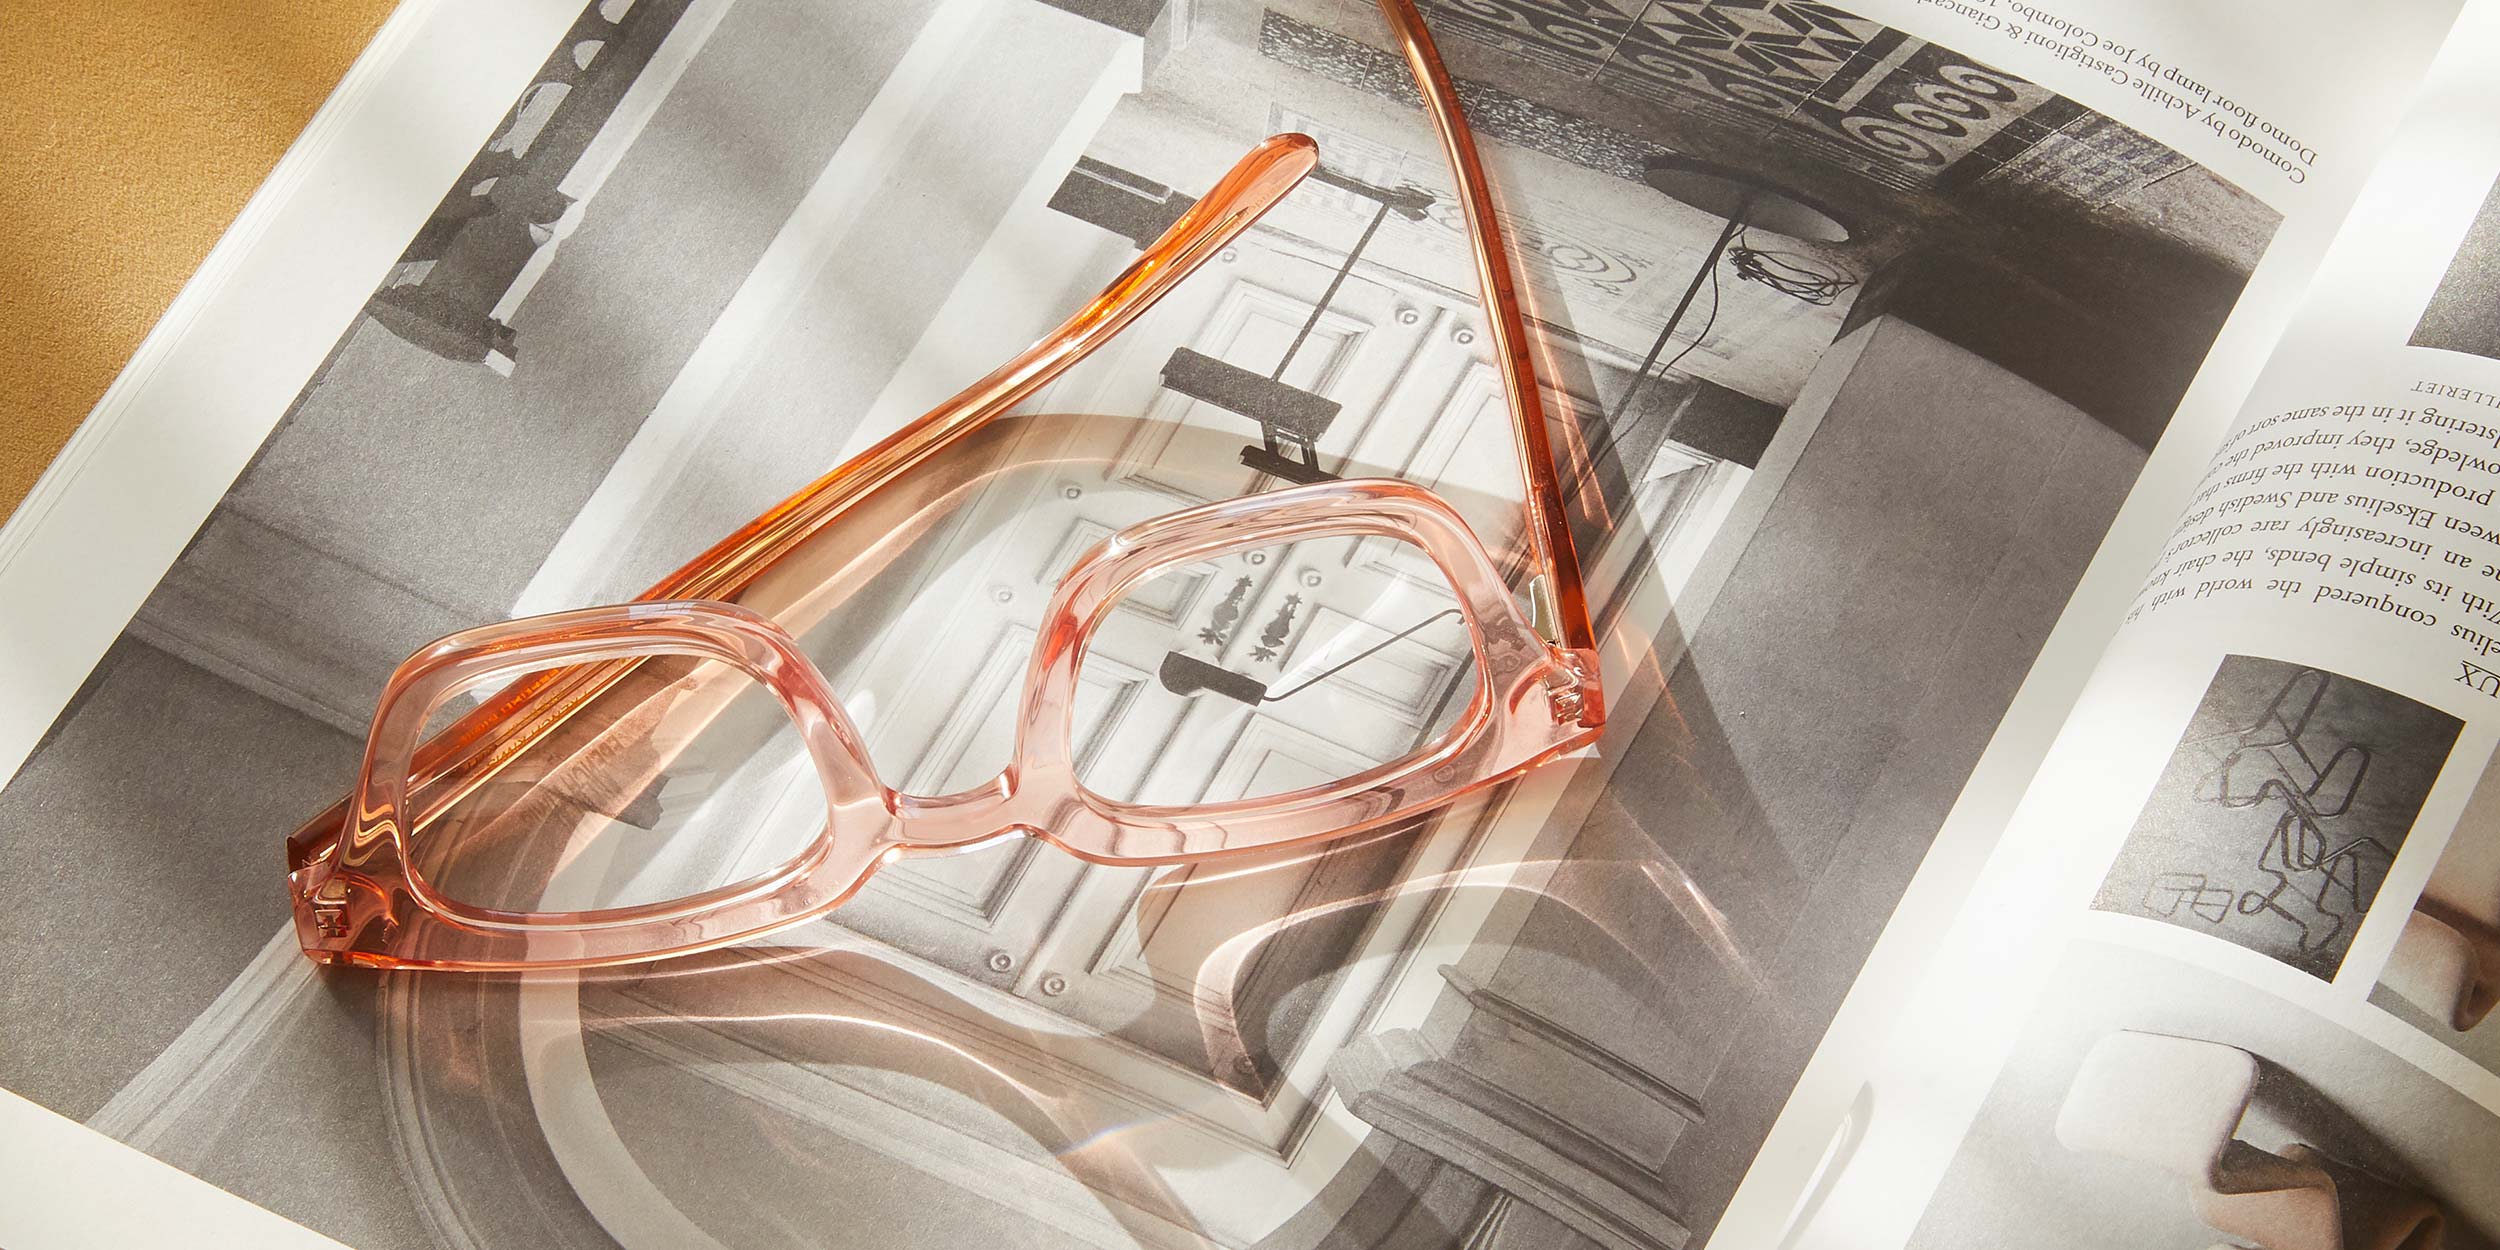 Photo Details of Ysée Tortoise Reading Glasses in a room